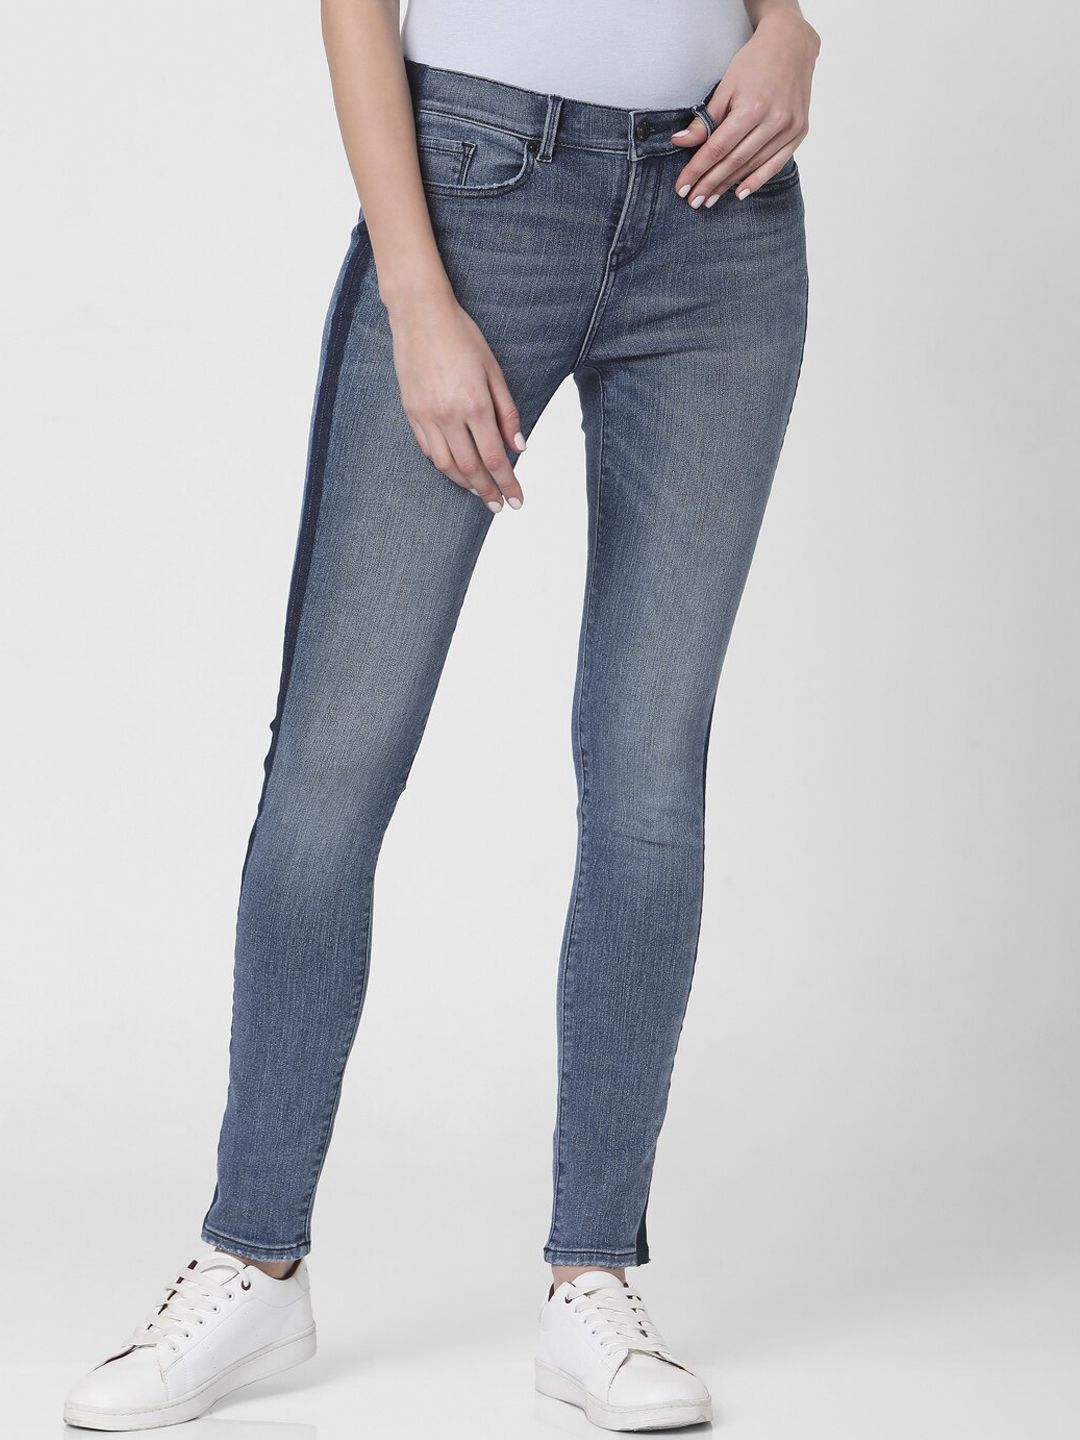 Vero Moda Women Blue Skinny Fit Mid-Rise Mildly Distressed Jeans Price in India